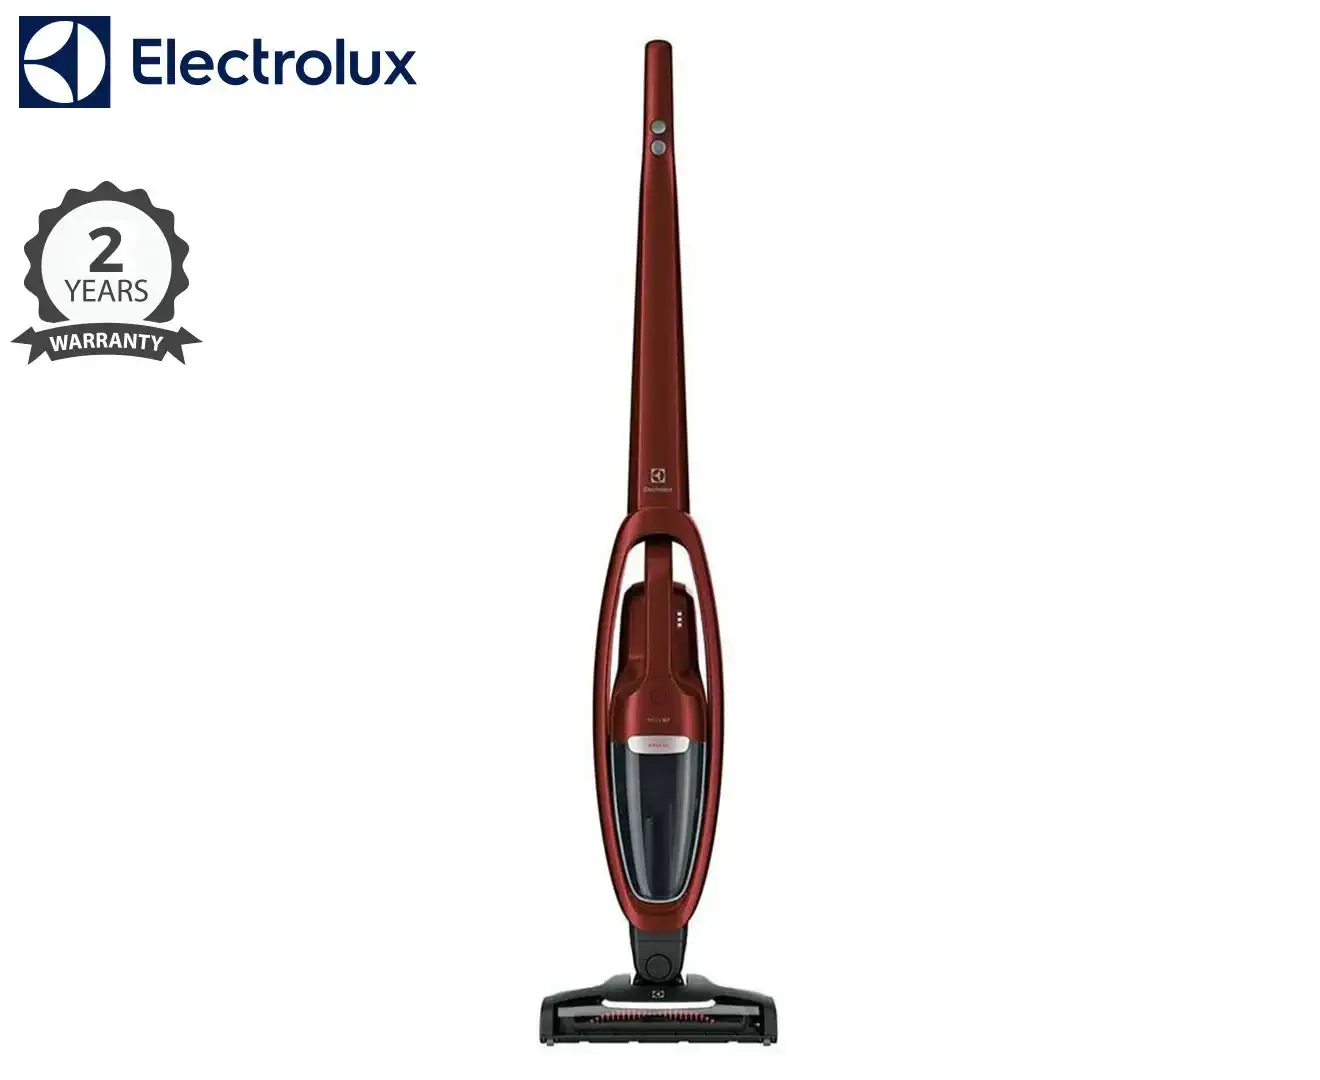 Electrolux Well Q7 Animal Cordless Vacuum Cleaner